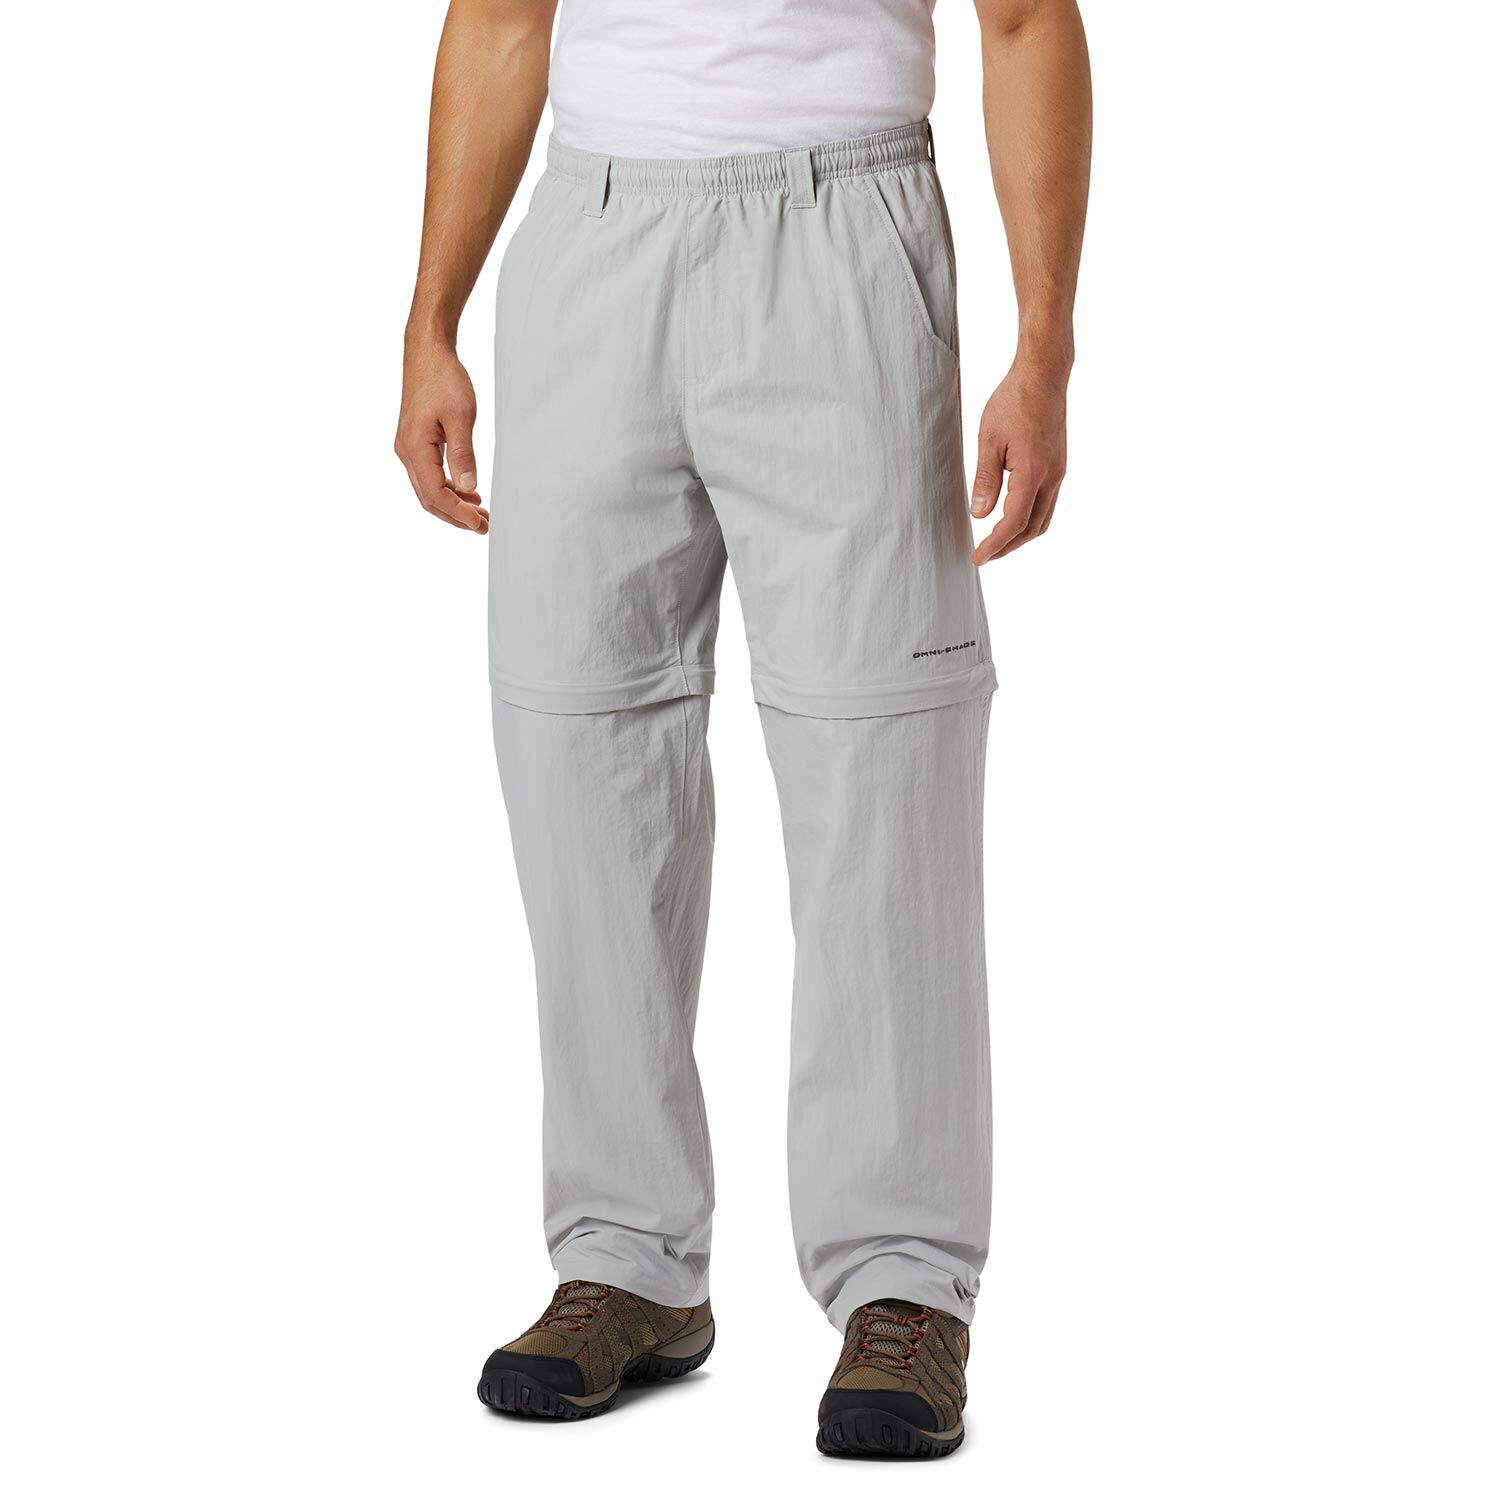 33,000ft Men's Convertible Hiking Pants, Quick Dry Stretch Zip-Off  Lightweight Cargo Pants for Camping Fishing Grey 34W x 30L - Walmart.com